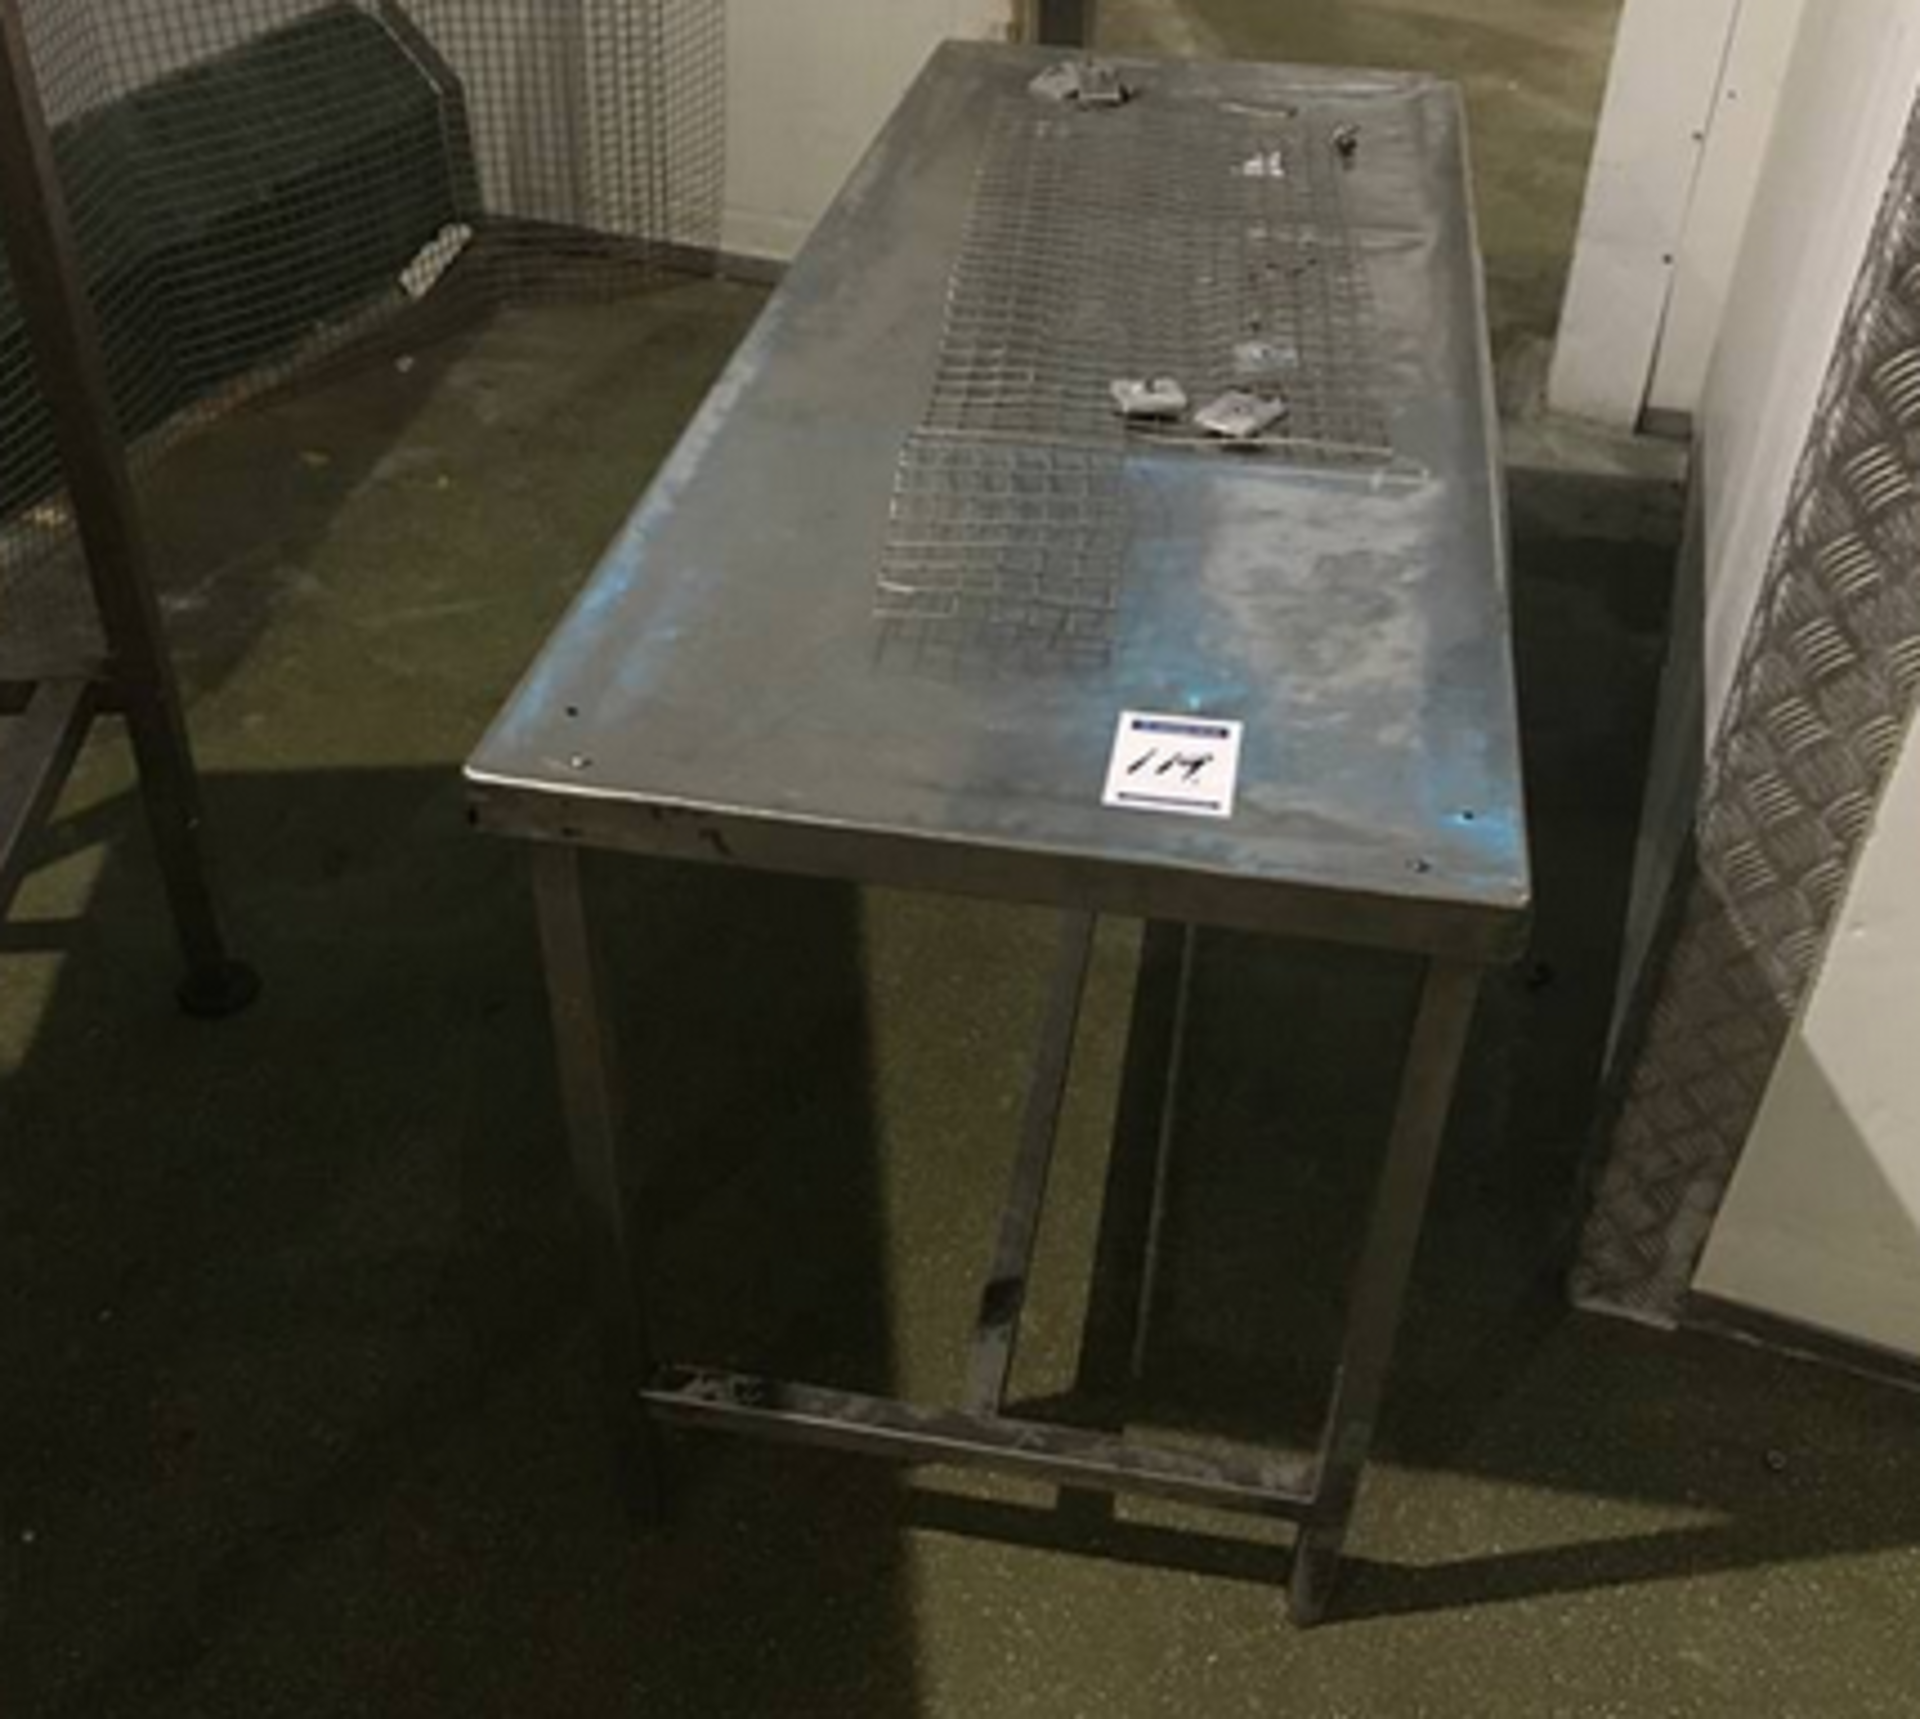 STAINLESS STEEL TABLE.